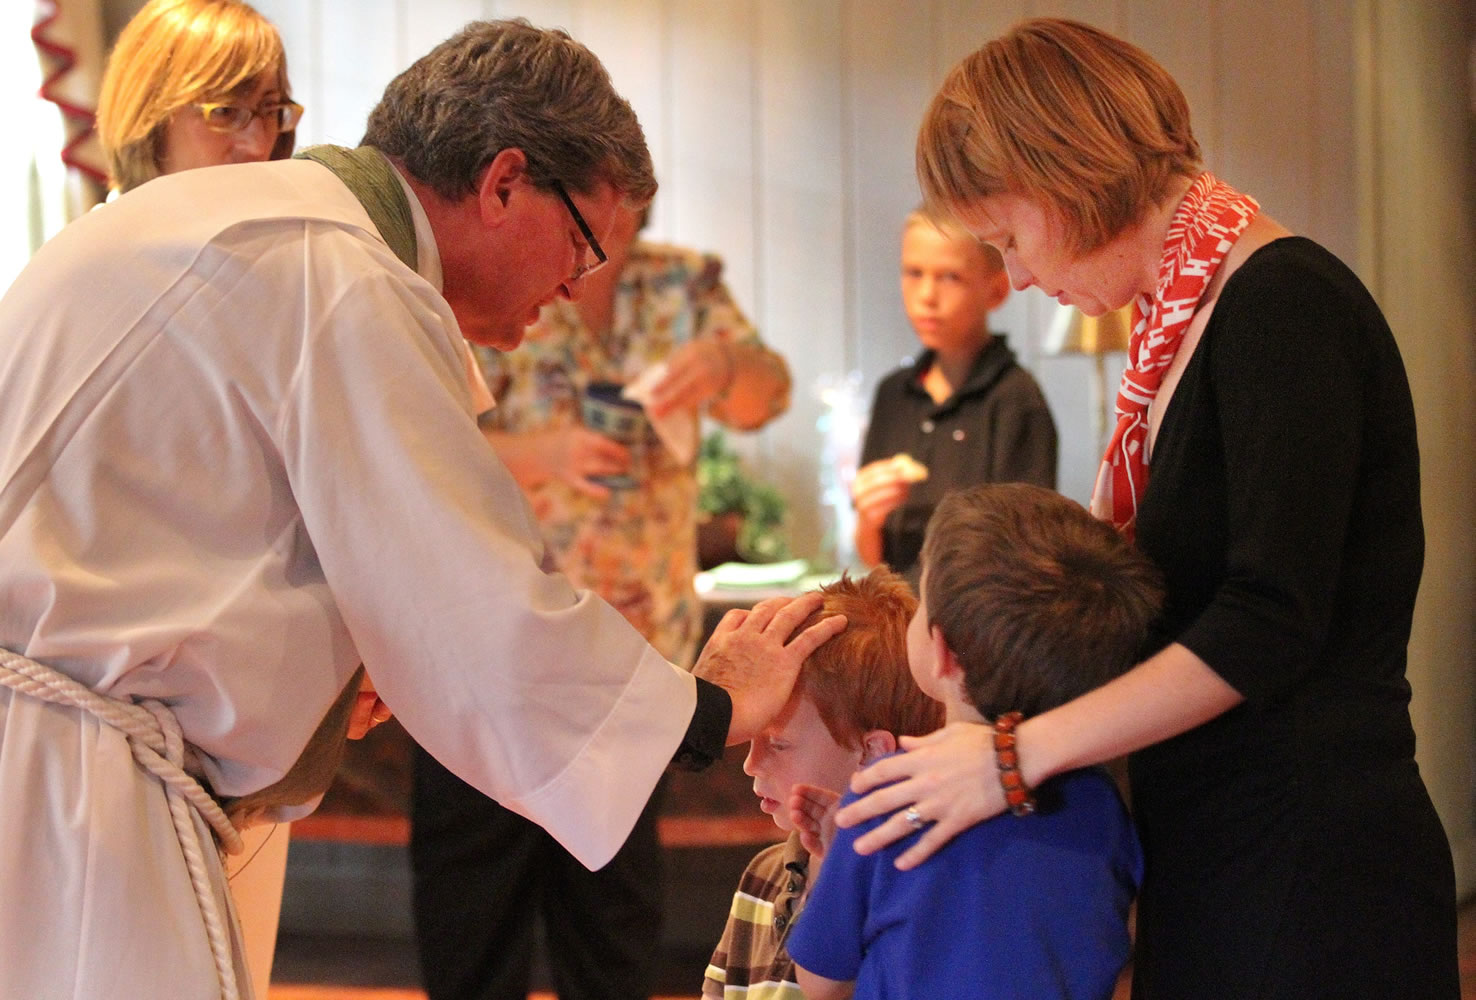 The Rev. Chip Stokes bestows a blessing on Thomas Barken-Stewart, 3, who is with his mother, Jacqueline Barken, and brother, Joshua Barken-Stewart, at a service at St. Paul's Episcopal Church in Delray Beach, Fla.